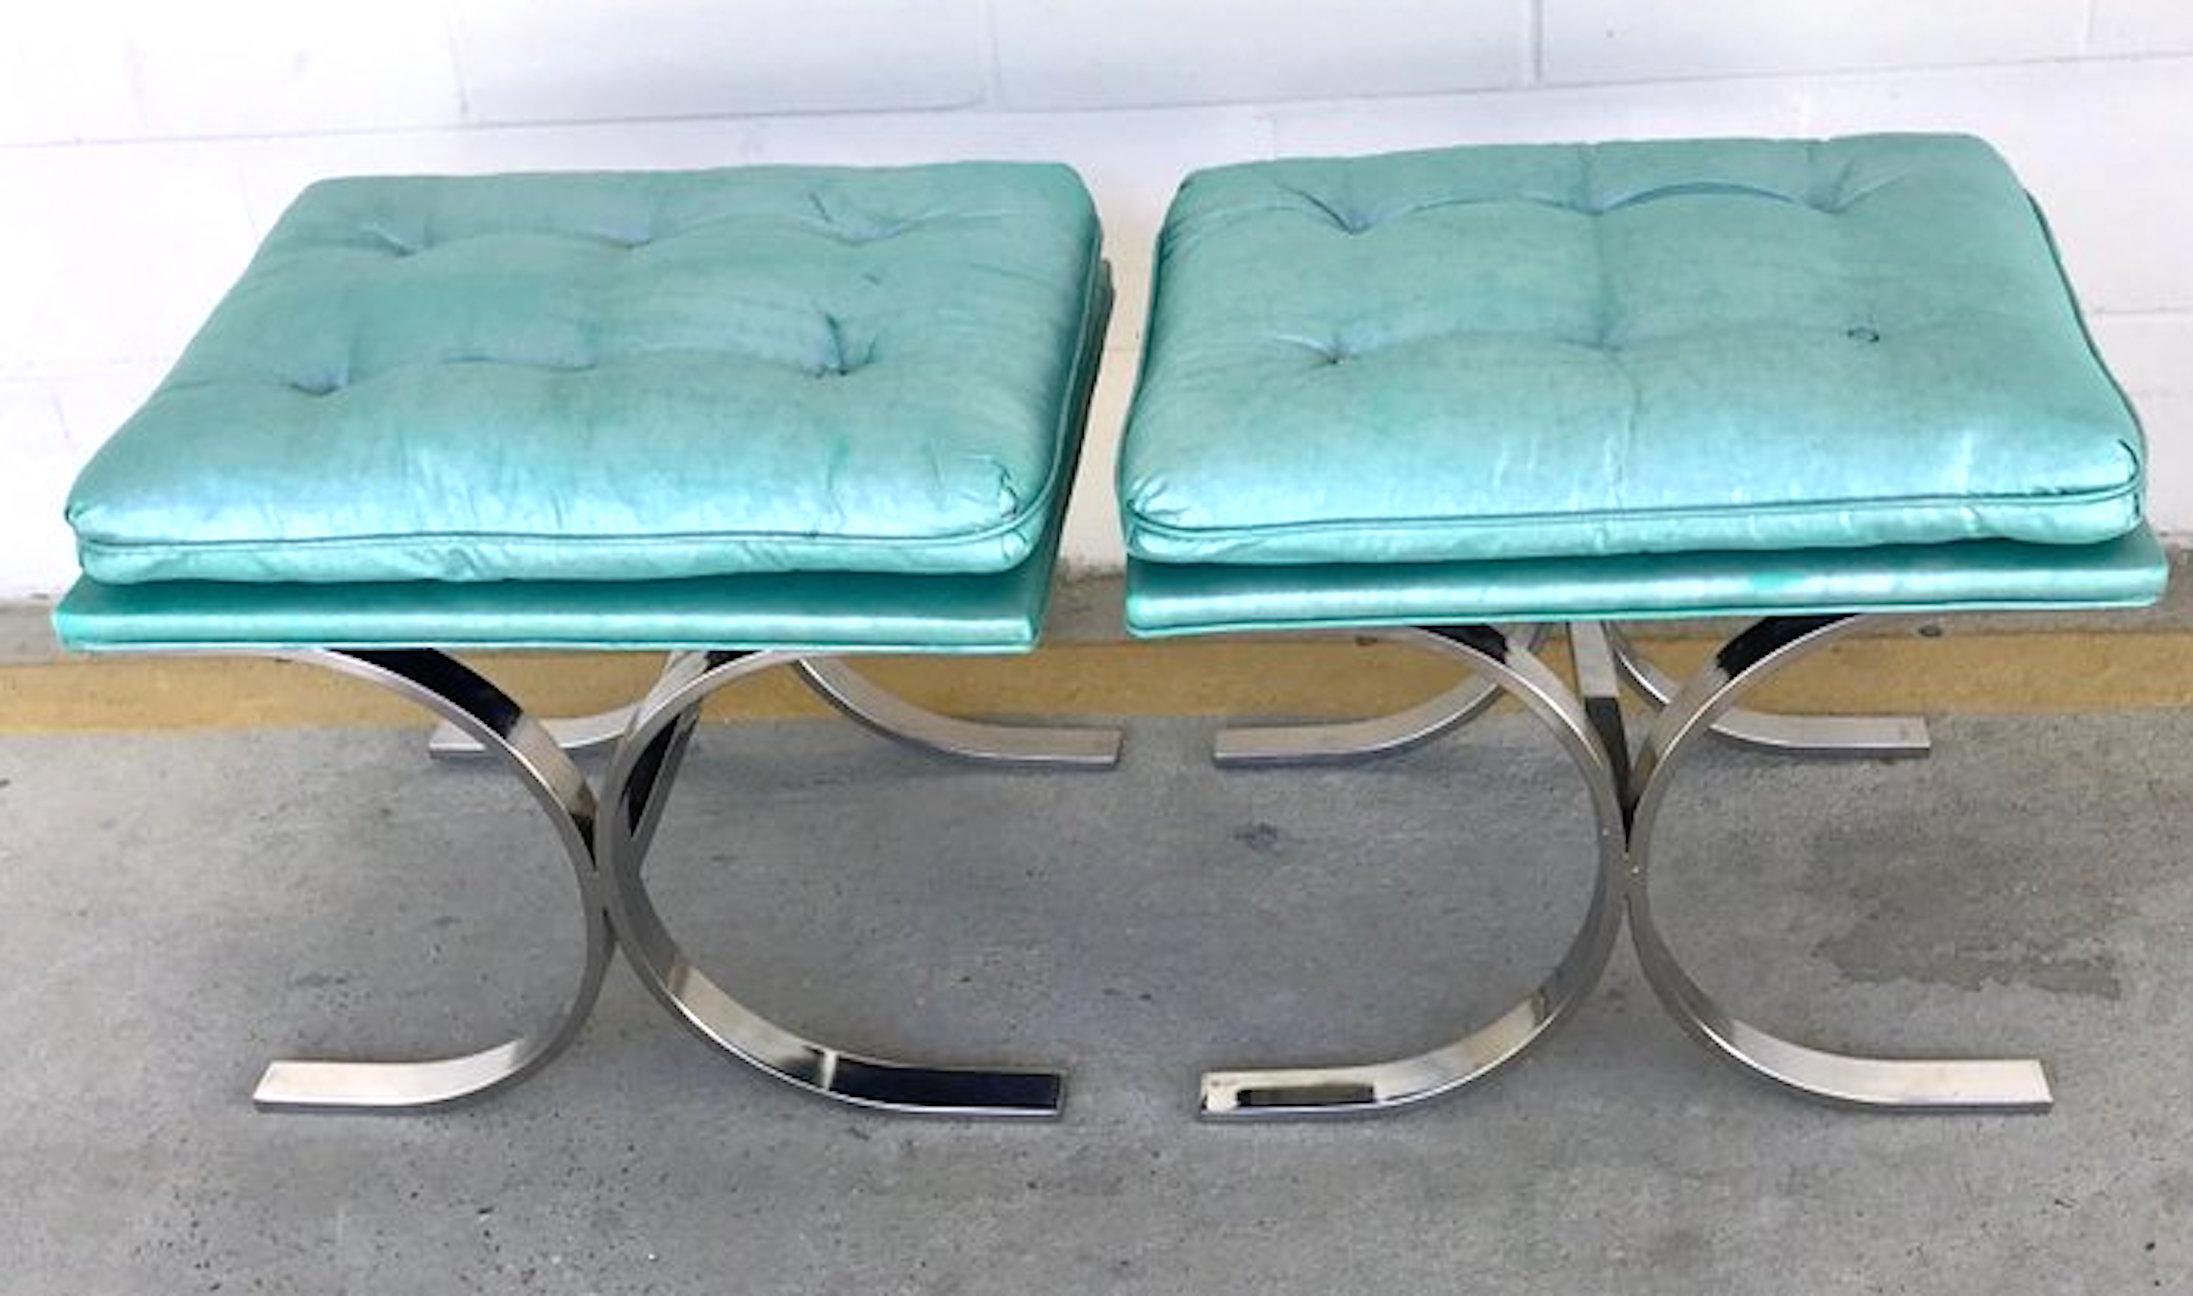 Pair of Milo Baughman style chrome Curule benches, Each one with vintage turquoise upholstered cushions, resting on a typical inverted double 